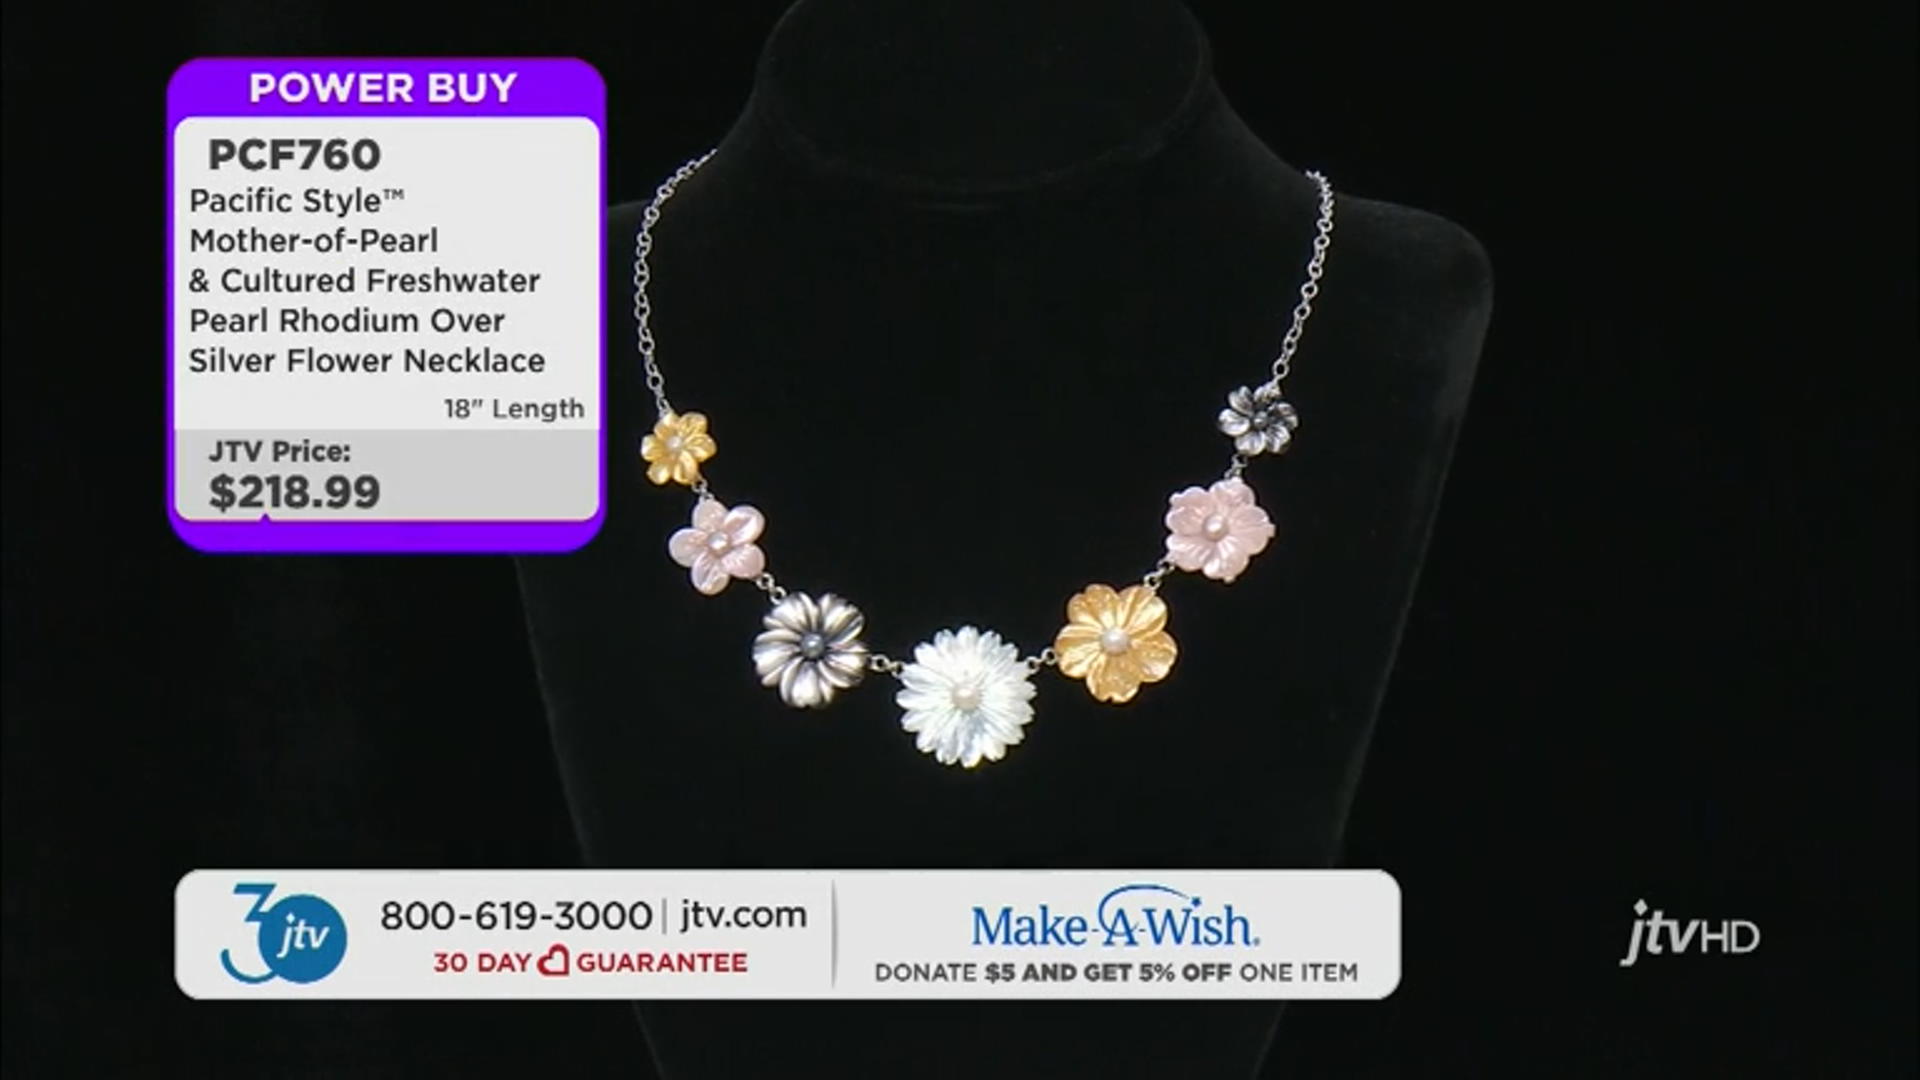 Mother-of-Pearl and Cultured Freshwater Pearl Rhodium Over Silver Flower Necklace Video Thumbnail